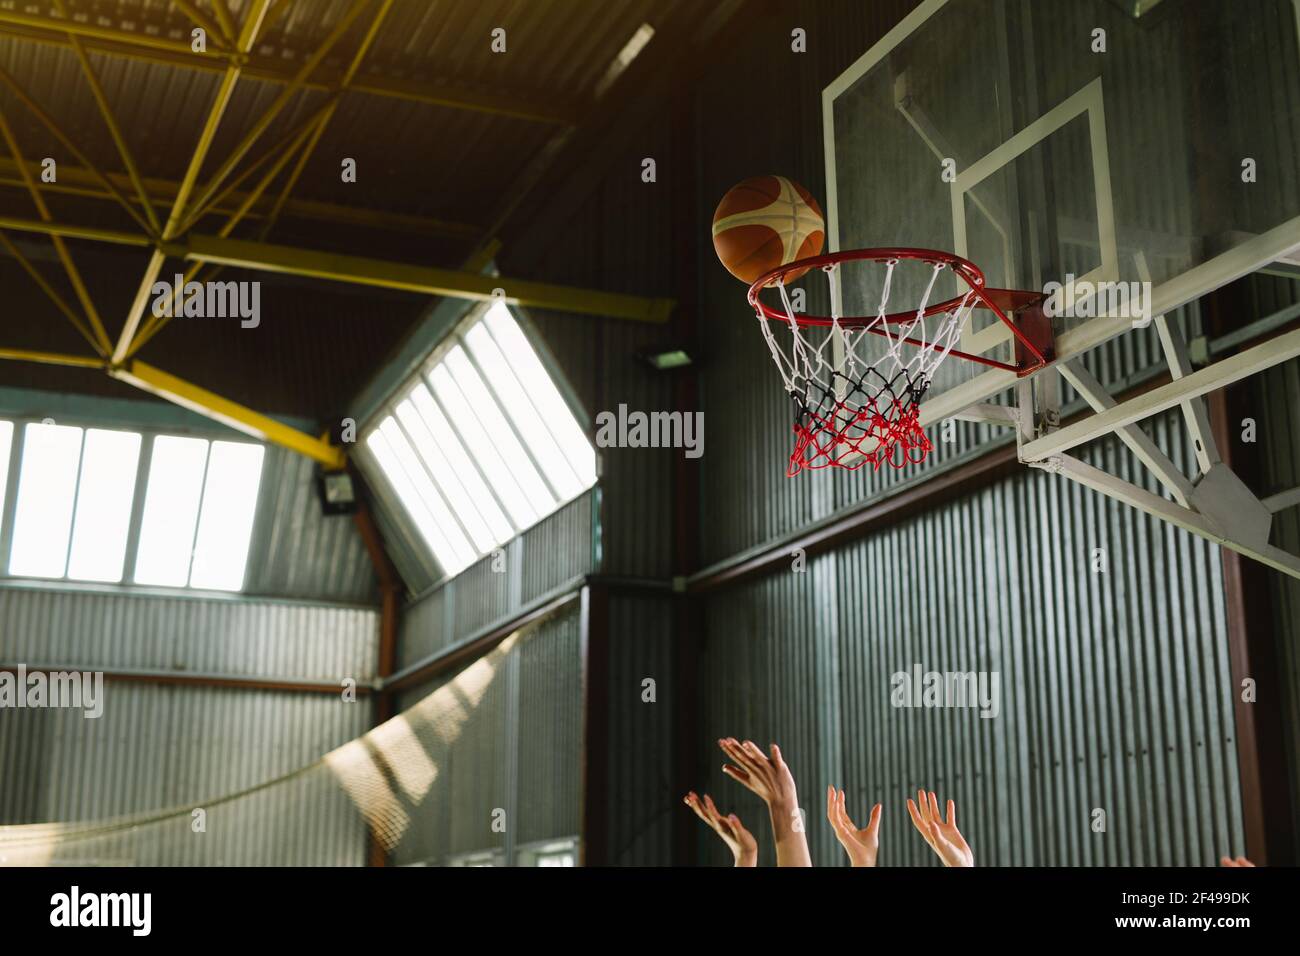 Players Hands And Ball Through Basketball Hoop Indoor Shot Sport Gym Championnat Window Sunny Light High Quality Photo Stock Photo Alamy